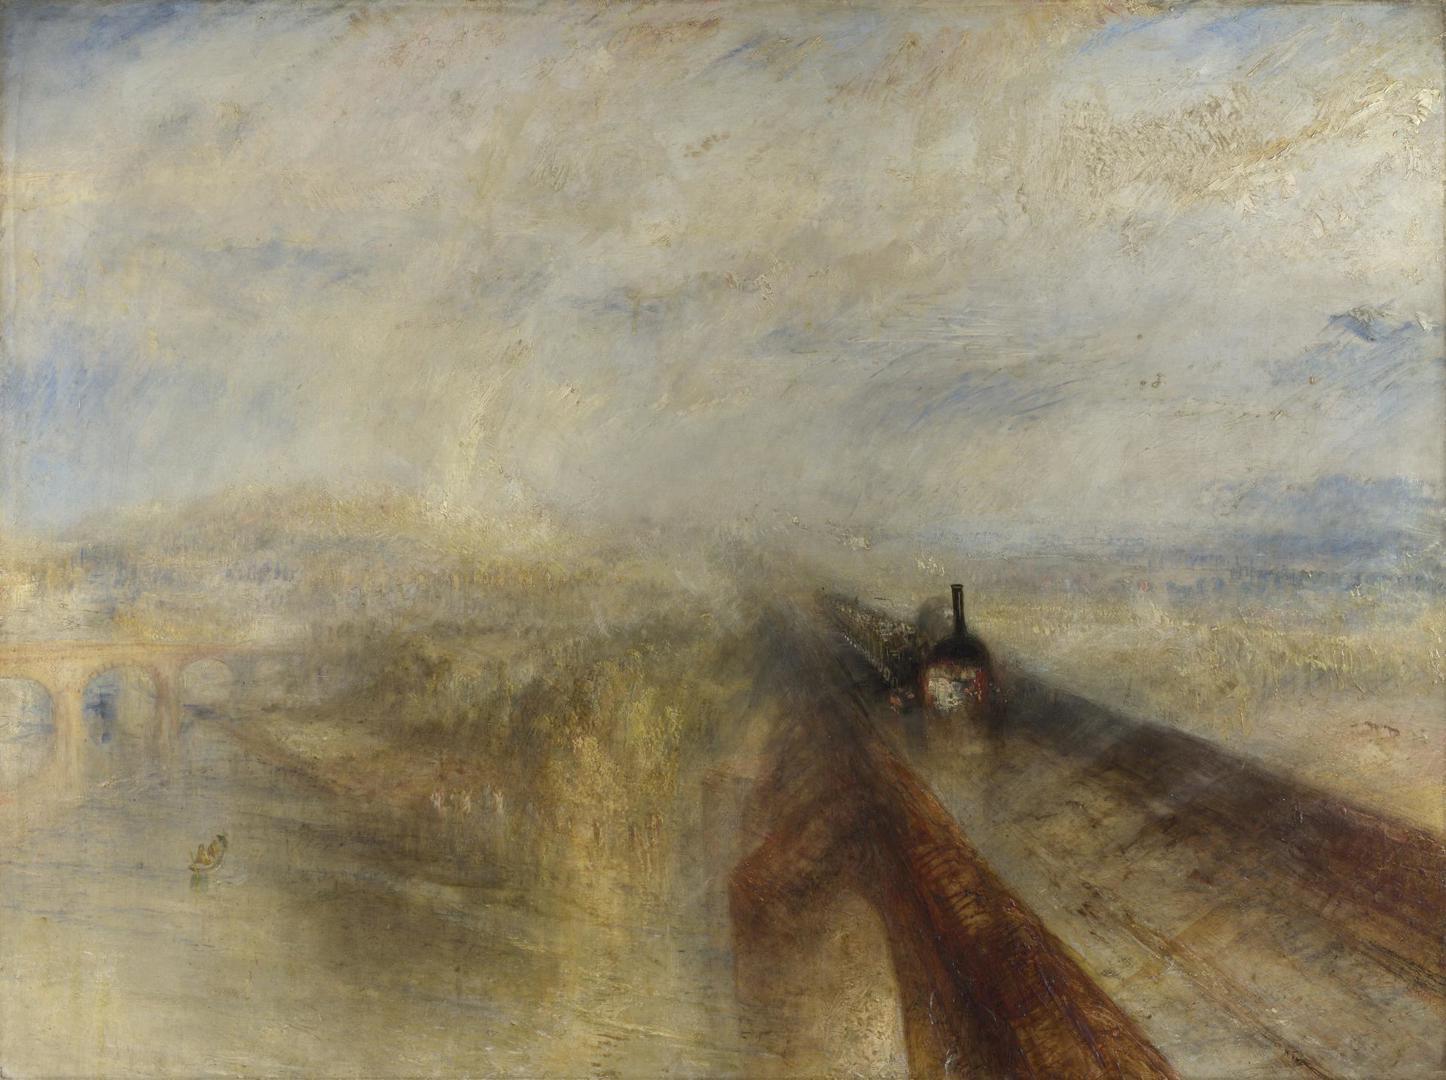 Rain, Steam, and Speed - The Great Western Railway by Joseph Mallord William Turner